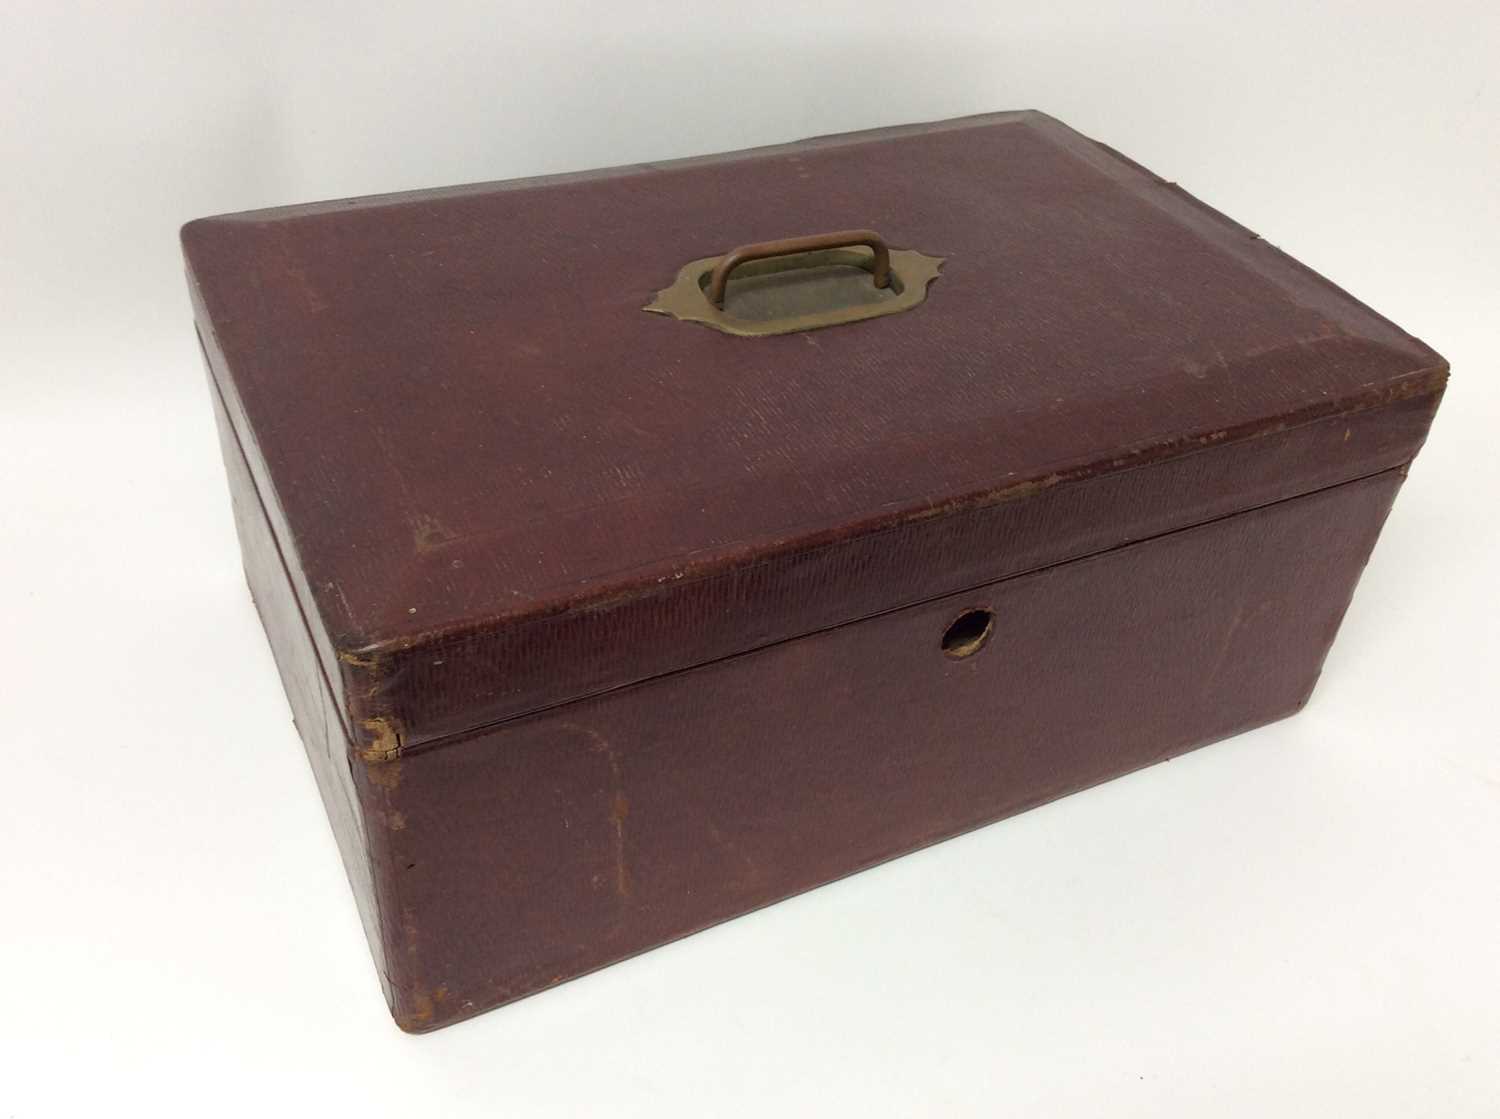 Lot 88 - Red Moroccan Leather Despatch Box with George V cypher to interior, by John Peck & Son